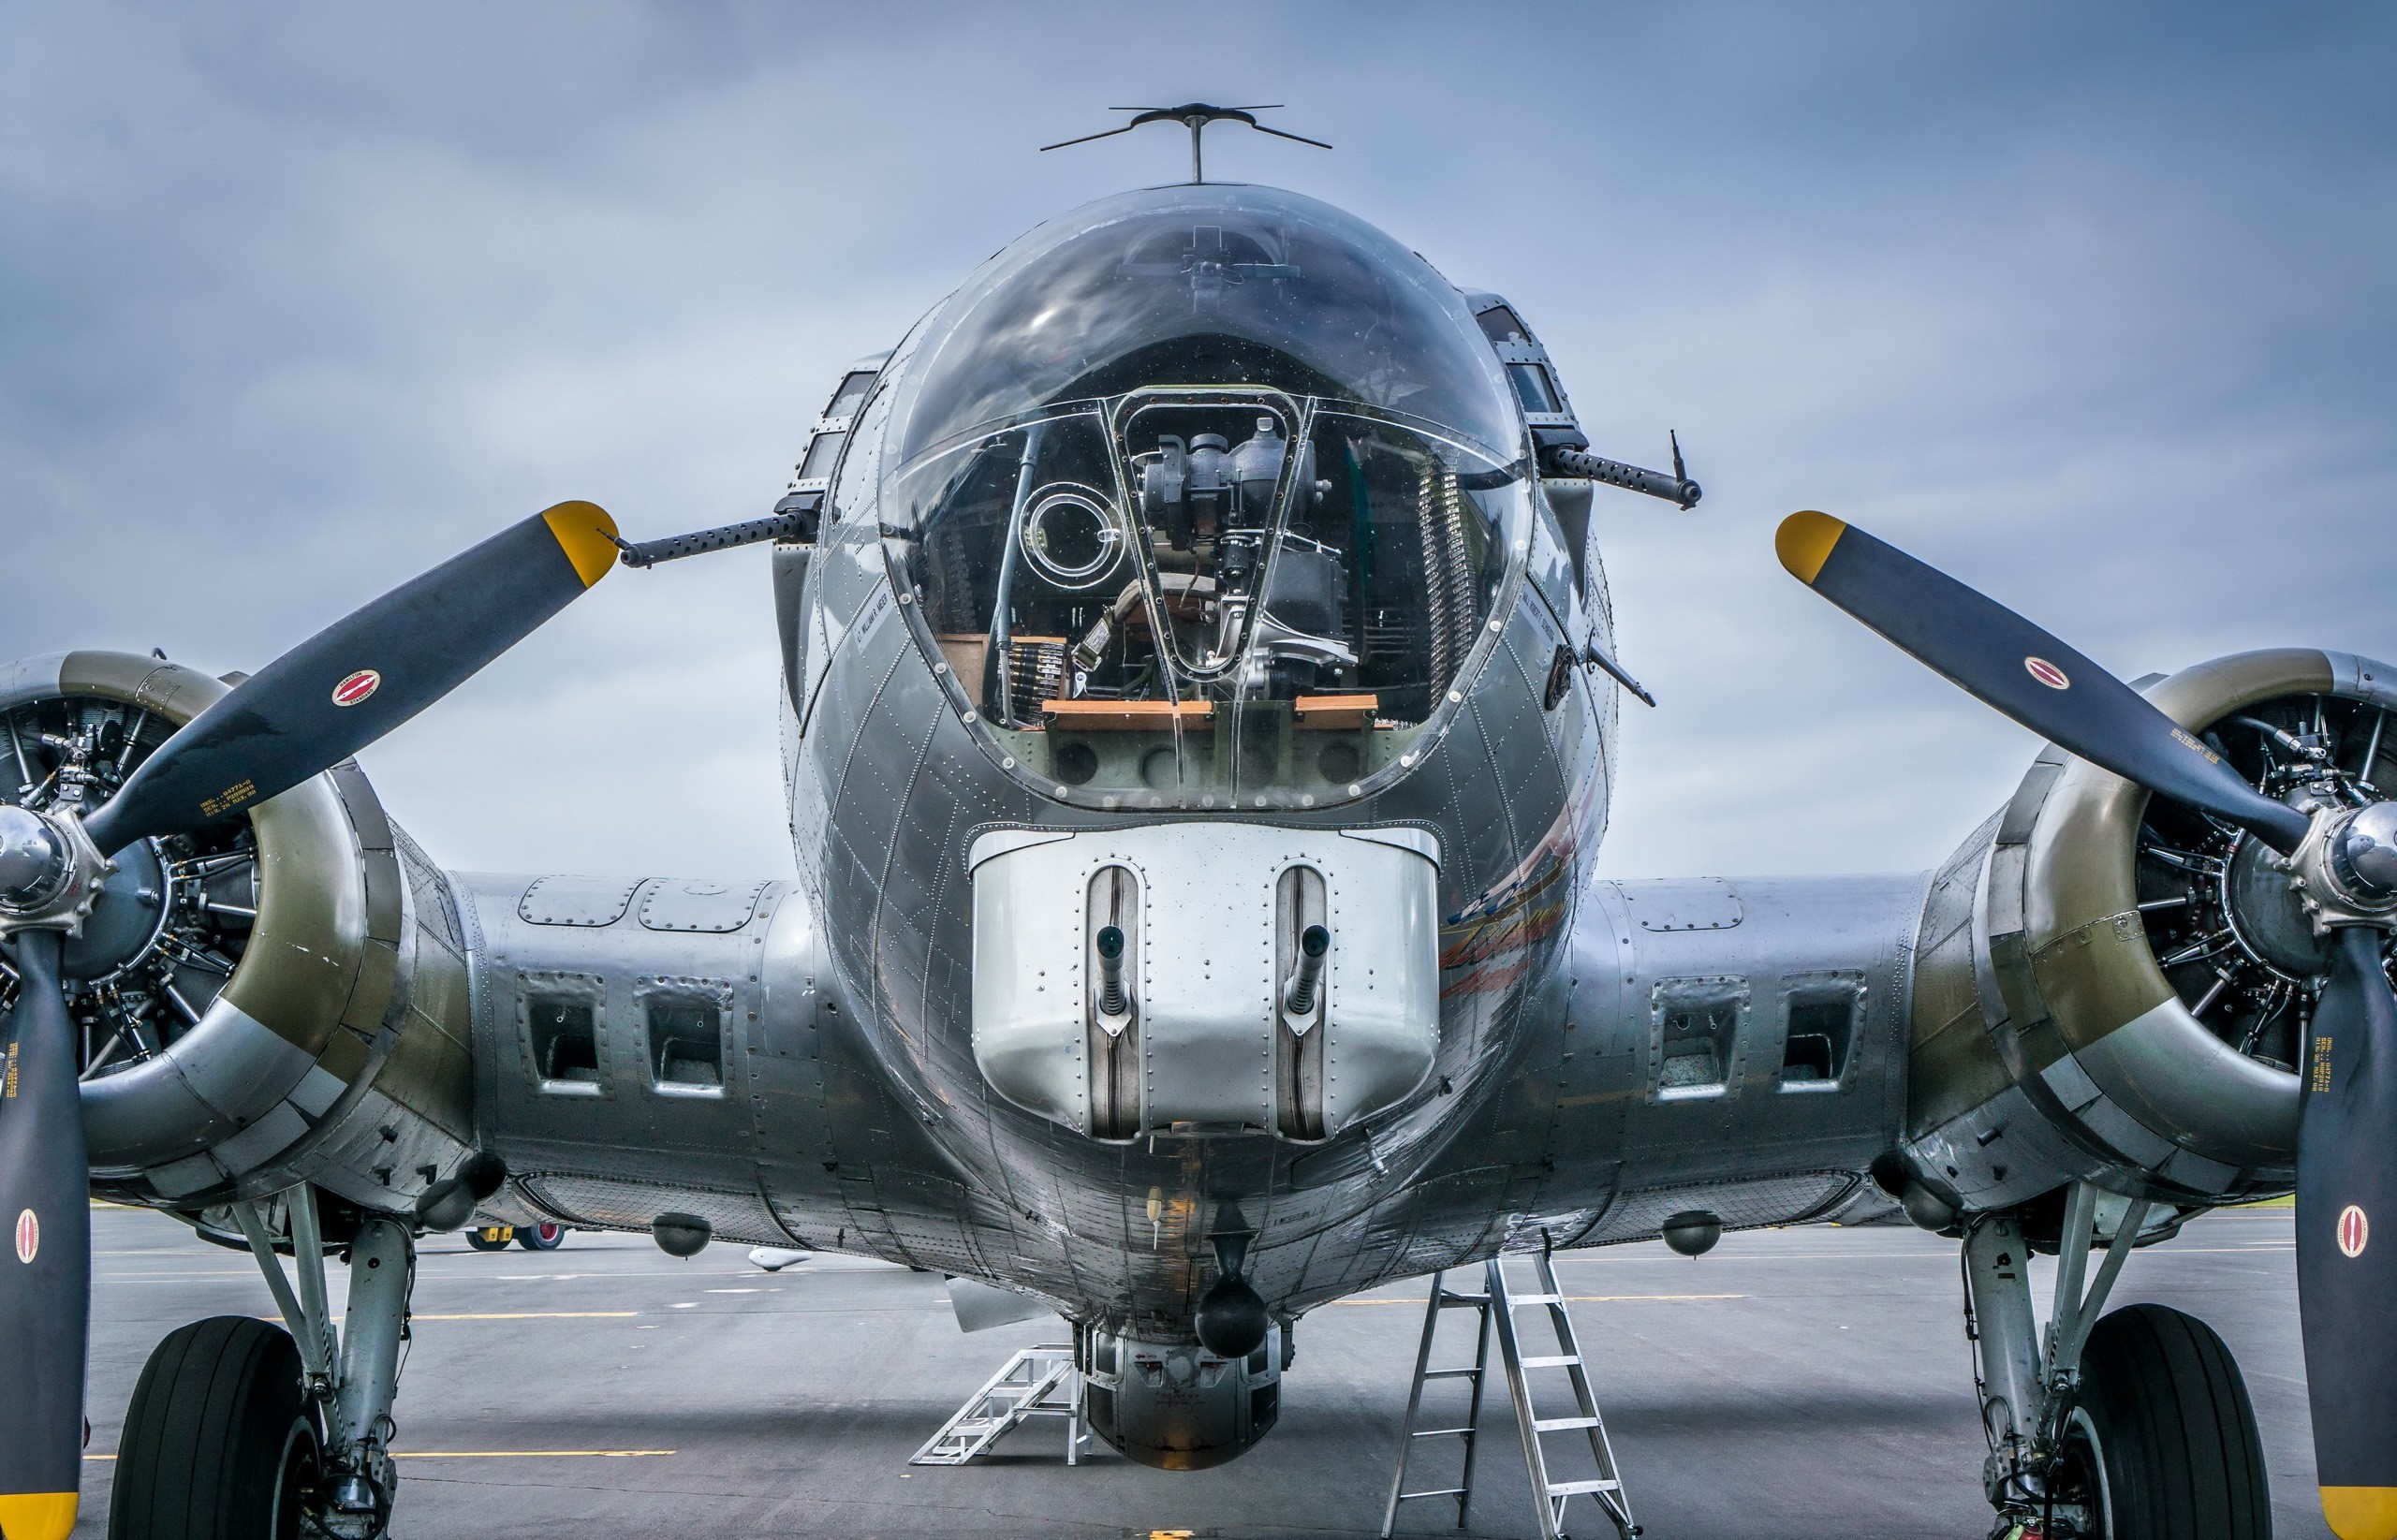 General 2560x1645 military vehicle aircraft Boeing B-17 Flying Fortress military aircraft military vehicle Bomber American aircraft Boeing